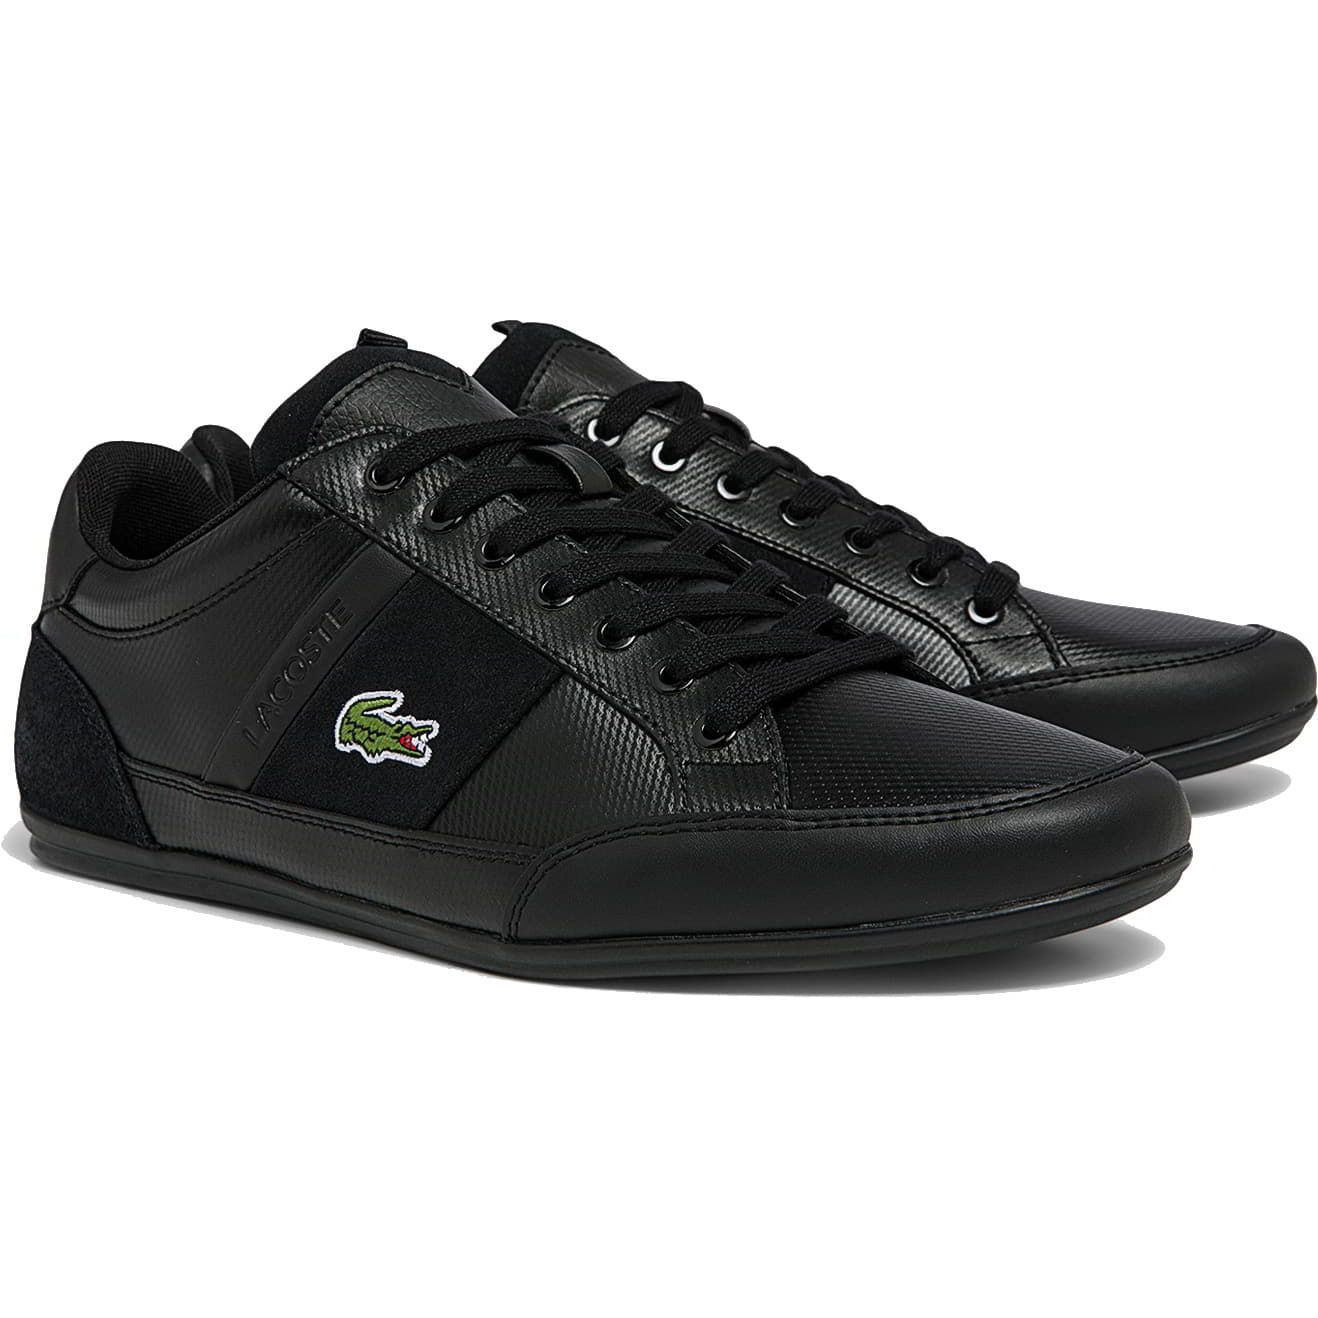 Lacoste Mens Chaymon BL 22 Leather Trainers Shoes - UK 8